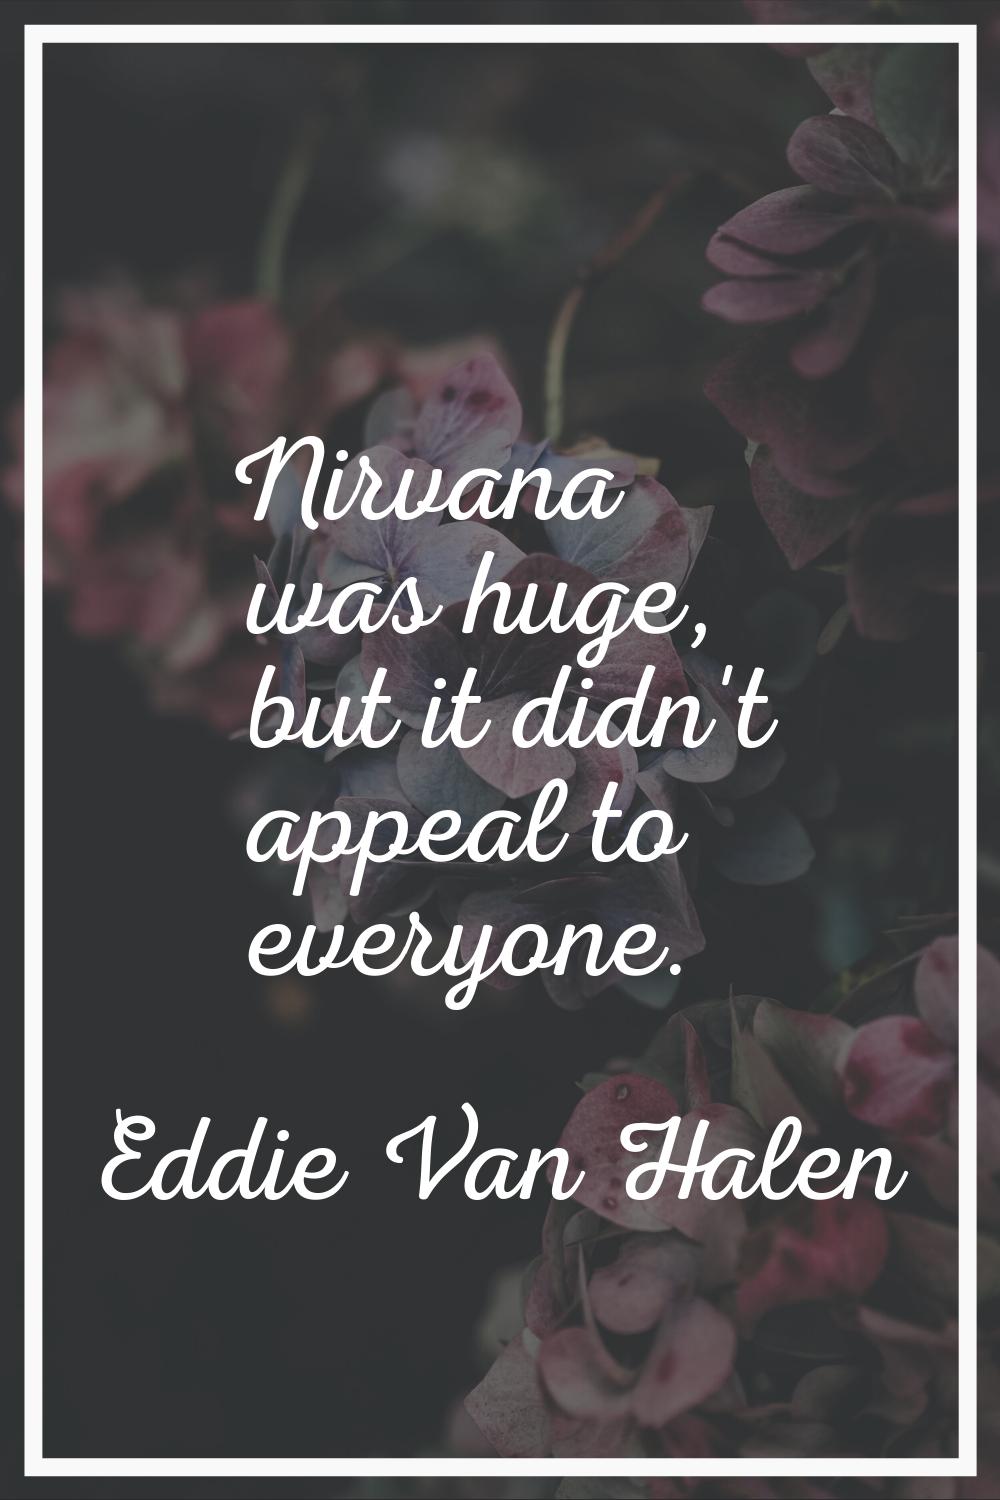 Nirvana was huge, but it didn't appeal to everyone.